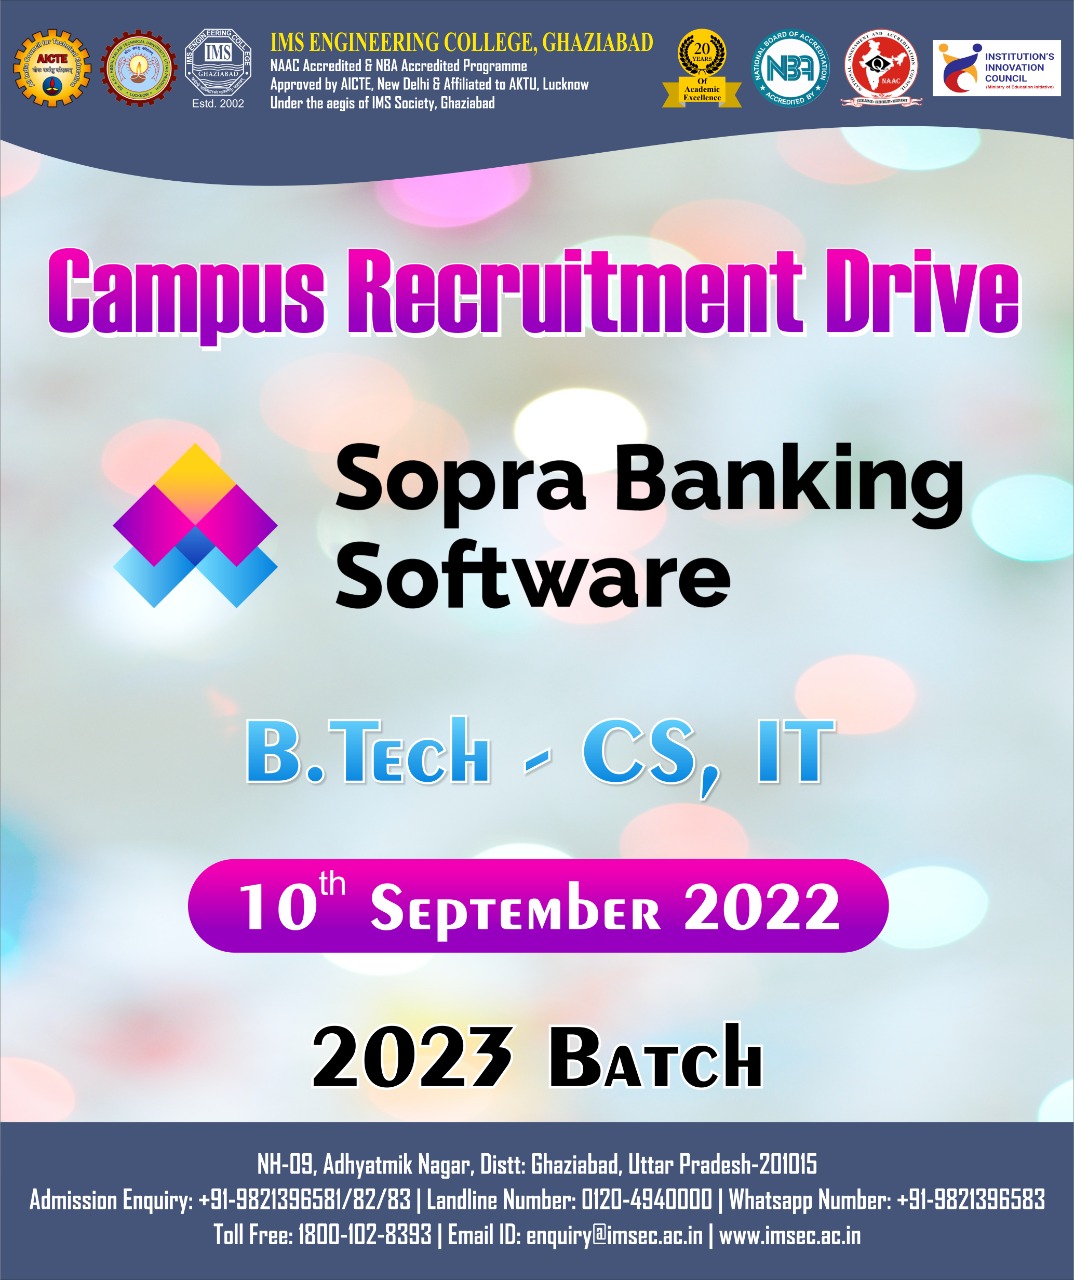 Campus Recruitment Drive of Sopra Banking Software